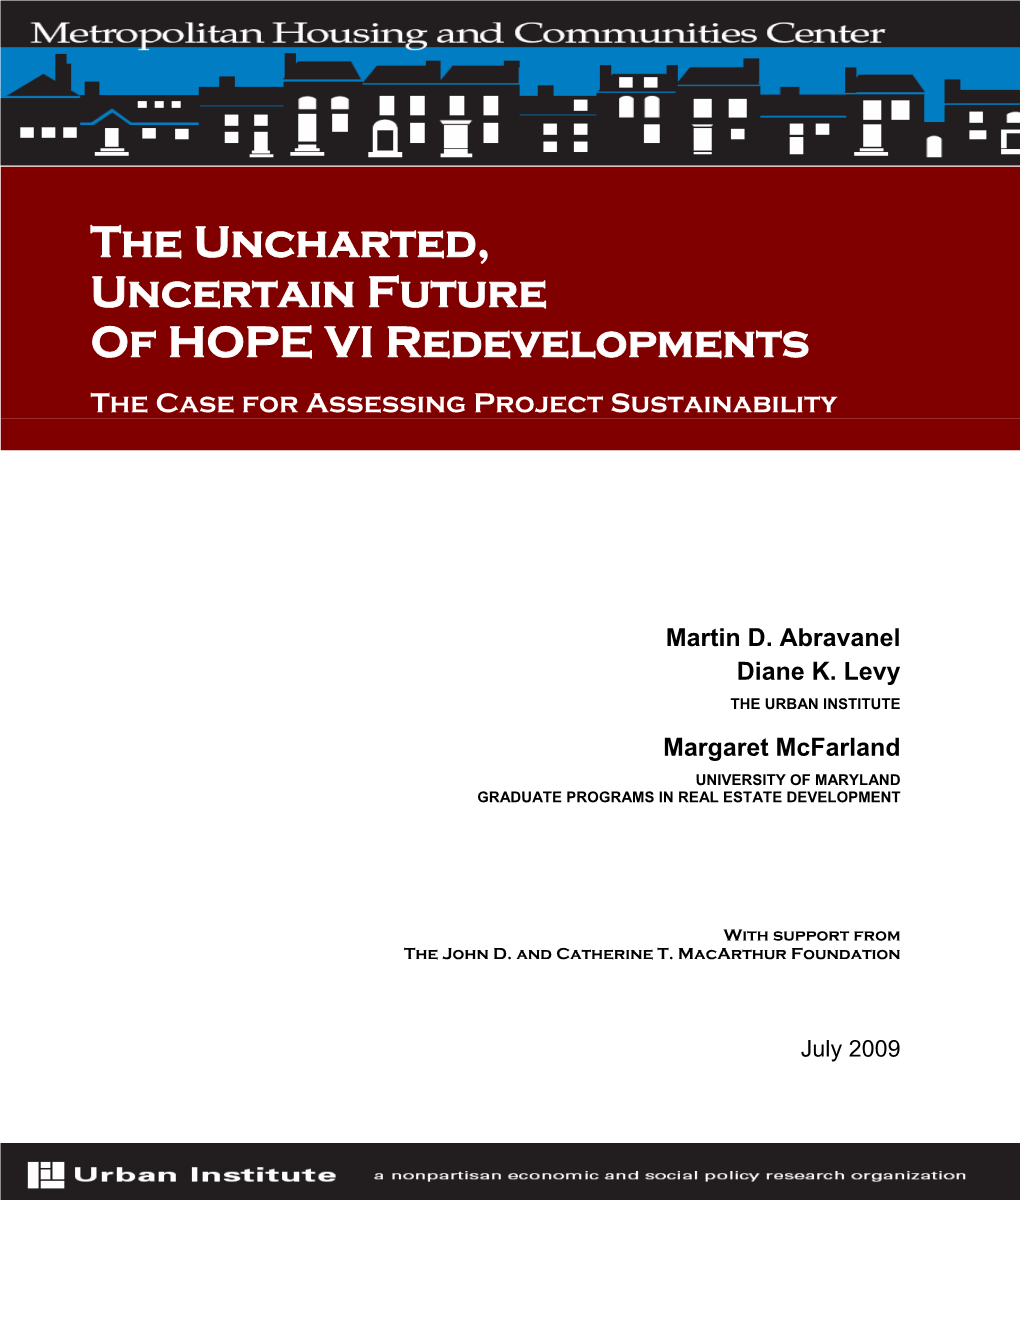 The Uncharted, Uncertain Future of HOPE VI Redevelopments the Case for Assessing Project Sustainability